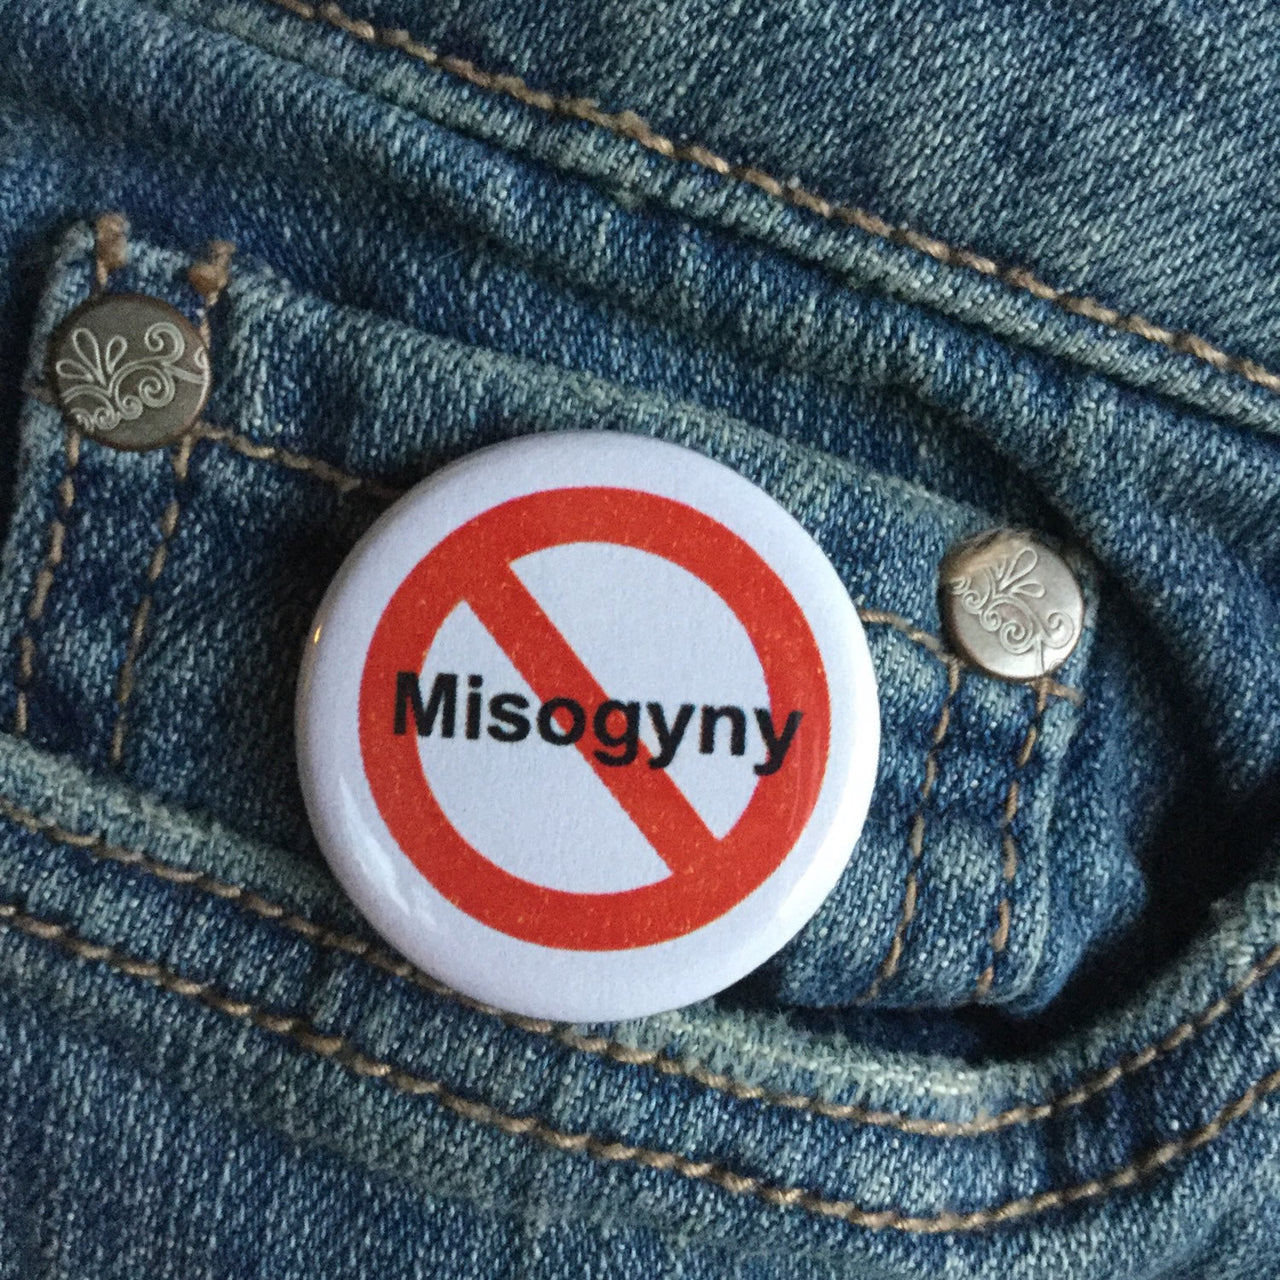 No misogyny button - Radical Buttons